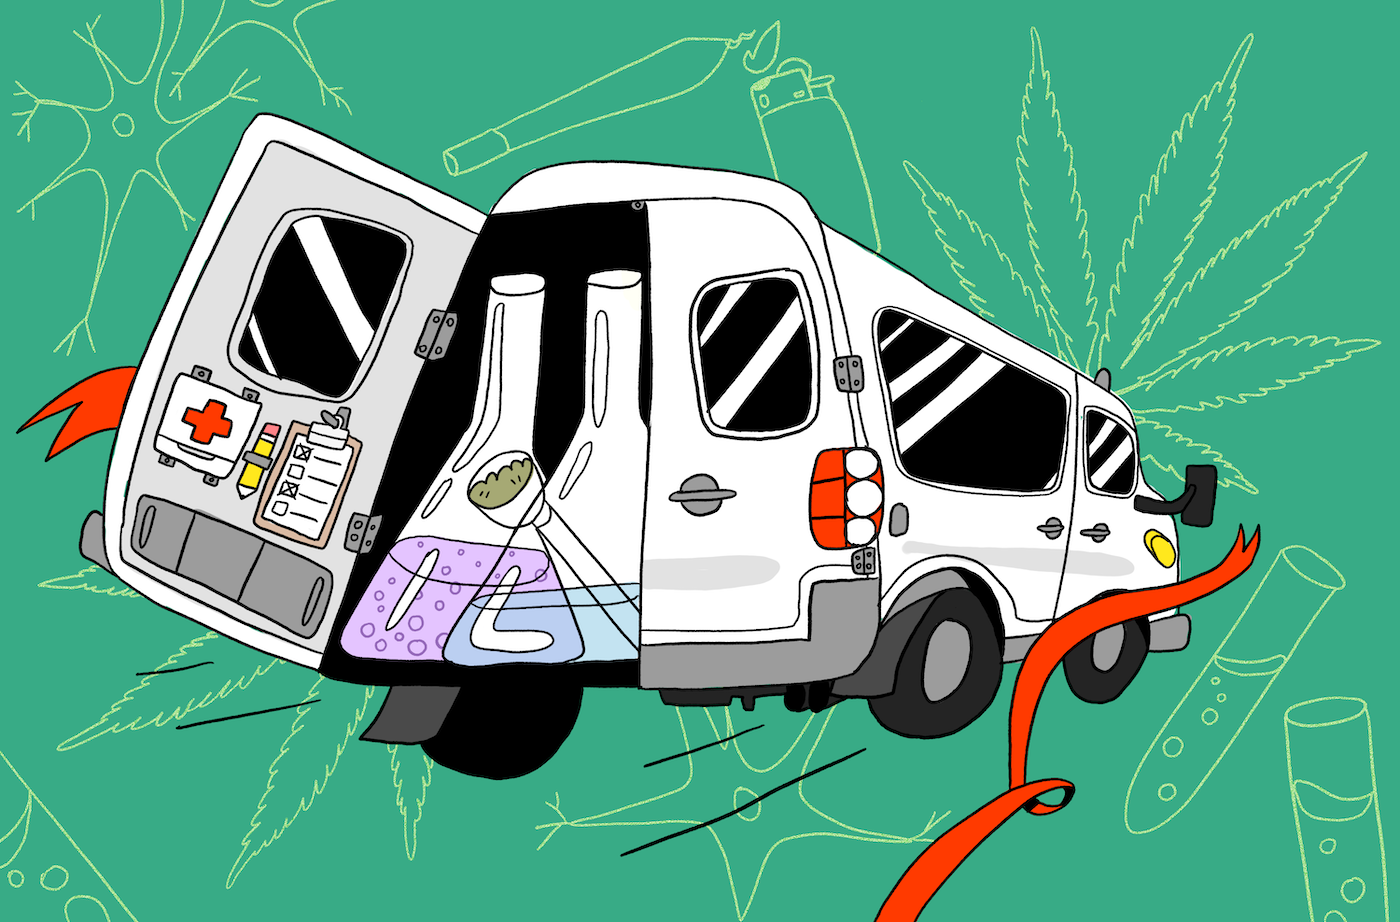 An illustration of a van driving away, breaking through red tape. Inside the van is a bong and a beaker, plus a health kit. Cannabis research van